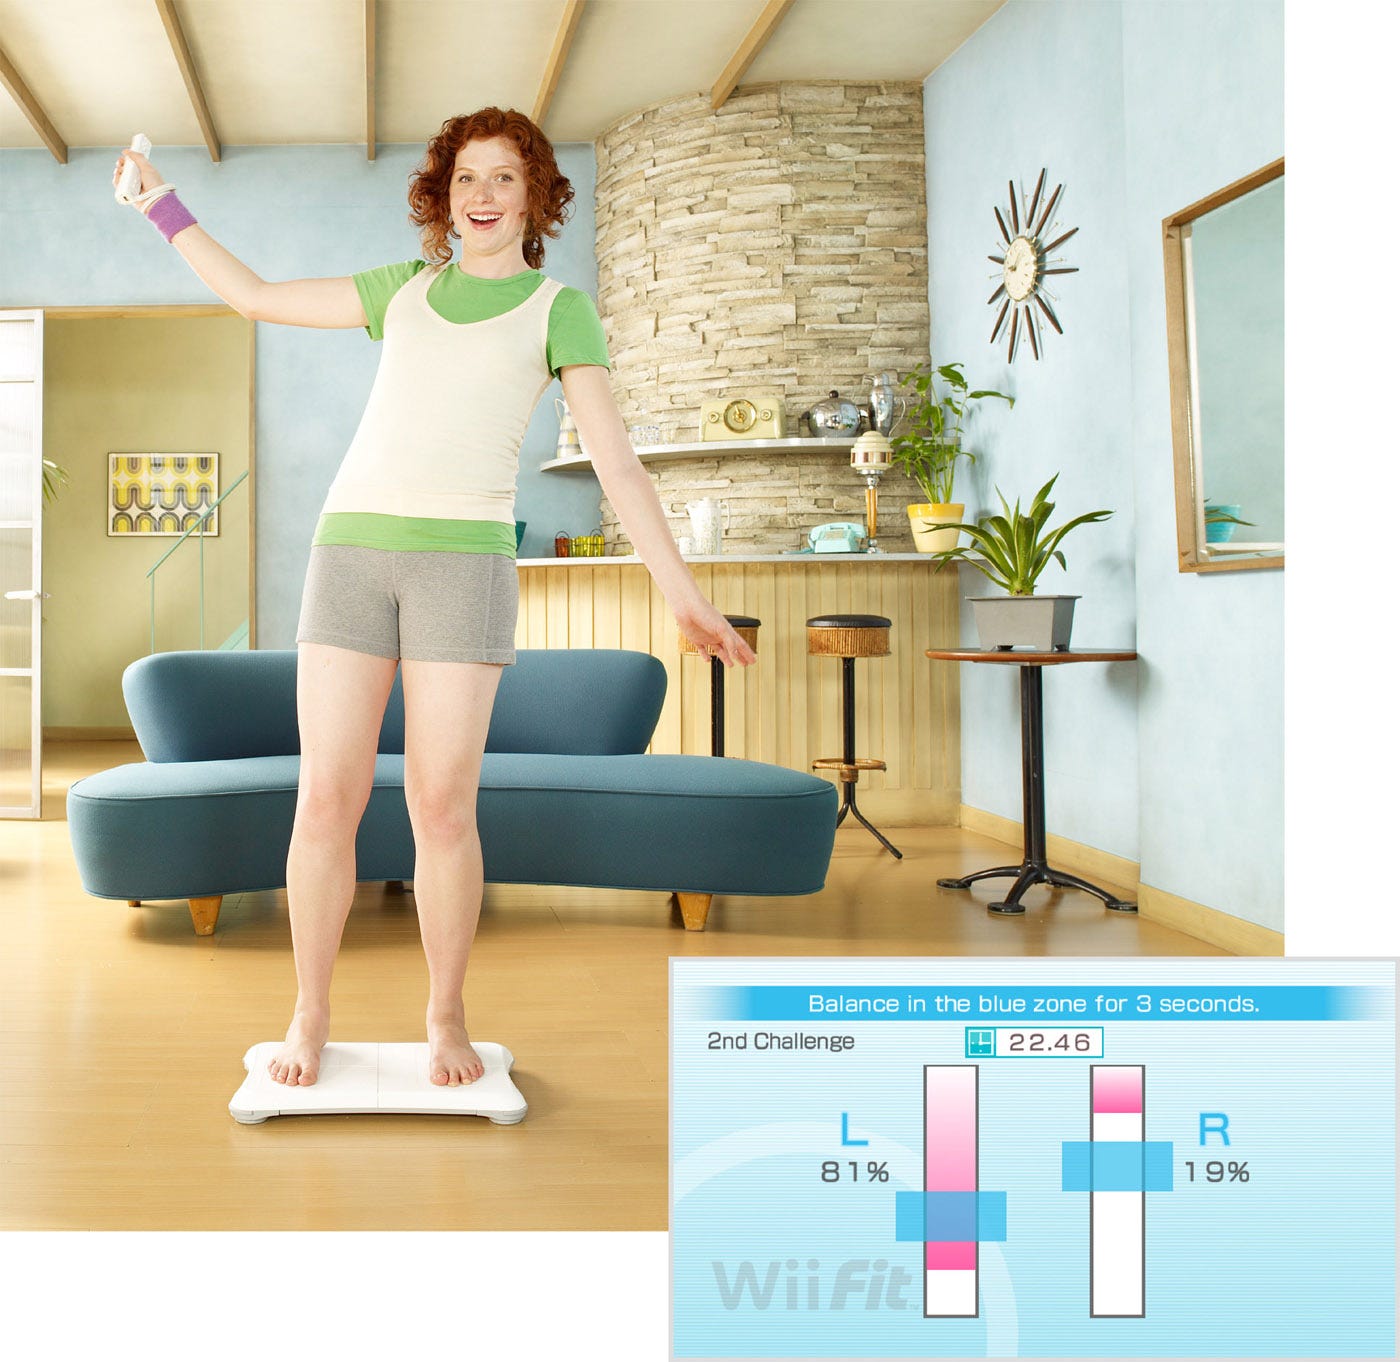 Remembering Wii Fit. The pandemic has created a dearth of…